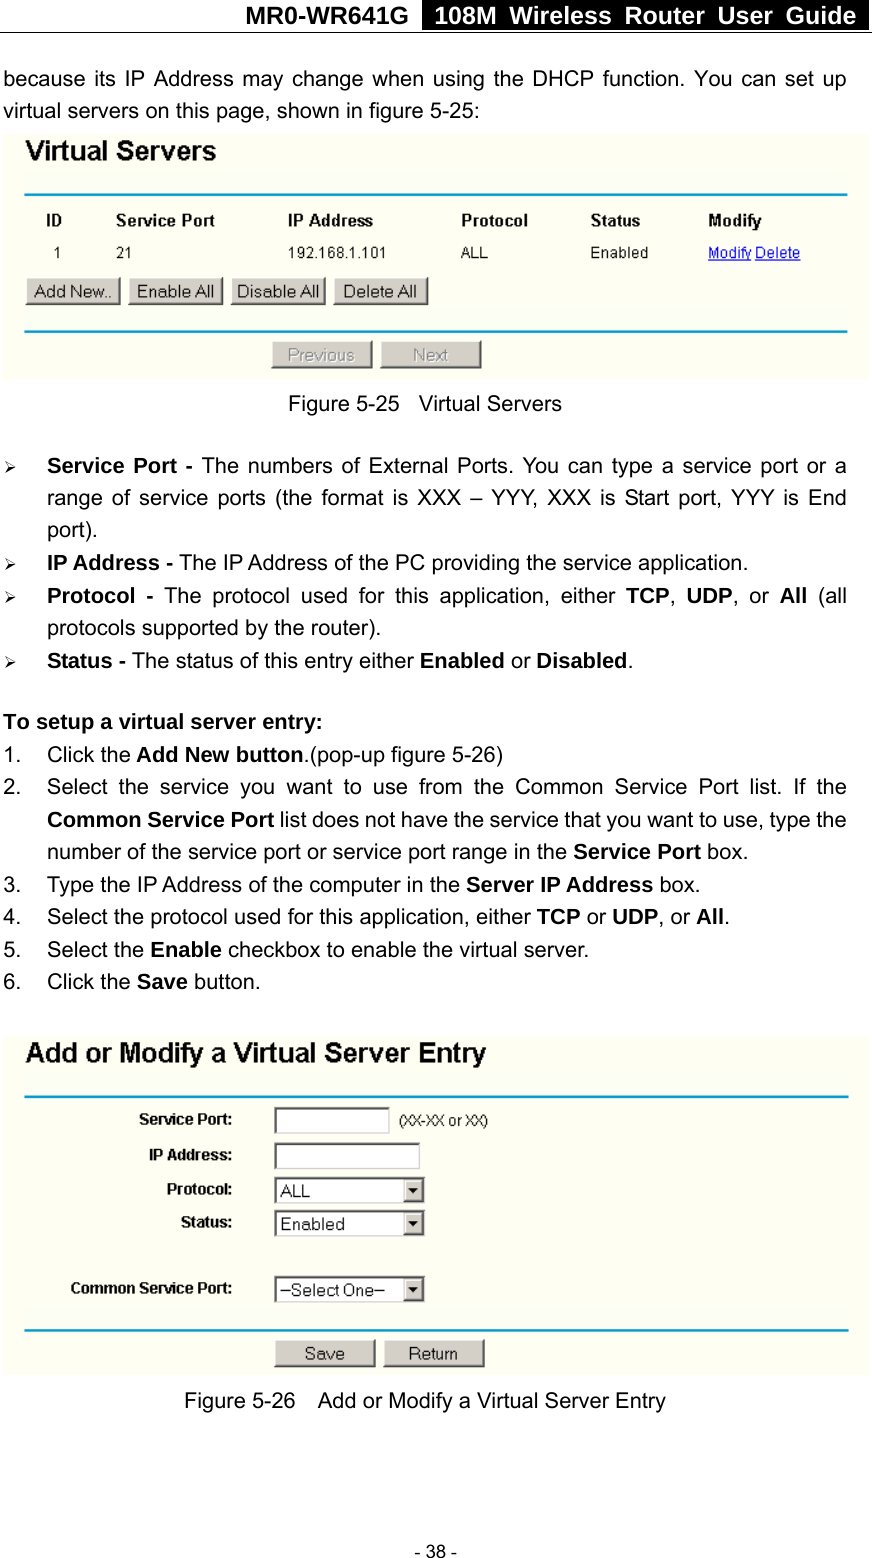 MR0-WR641G   108M Wireless Router User Guide  because its IP Address may change when using the DHCP function. You can set up virtual servers on this page, shown in figure 5-25:  Figure 5-25  Virtual Servers ¾ Service Port - The numbers of External Ports. You can type a service port or a range of service ports (the format is XXX – YYY, XXX is Start port, YYY is End port).  ¾ IP Address - The IP Address of the PC providing the service application. ¾ Protocol - The protocol used for this application, either TCP,  UDP, or All  (all protocols supported by the router). ¾ Status - The status of this entry either Enabled or Disabled. To setup a virtual server entry:   1. Click the Add New button.(pop-up figure 5-26) 2.  Select the service you want to use from the Common Service Port list. If the Common Service Port list does not have the service that you want to use, type the number of the service port or service port range in the Service Port box. 3.  Type the IP Address of the computer in the Server IP Address box.  4.  Select the protocol used for this application, either TCP or UDP, or All. 5. Select the Enable checkbox to enable the virtual server. 6. Click the Save button.    Figure 5-26    Add or Modify a Virtual Server Entry  - 38 - 